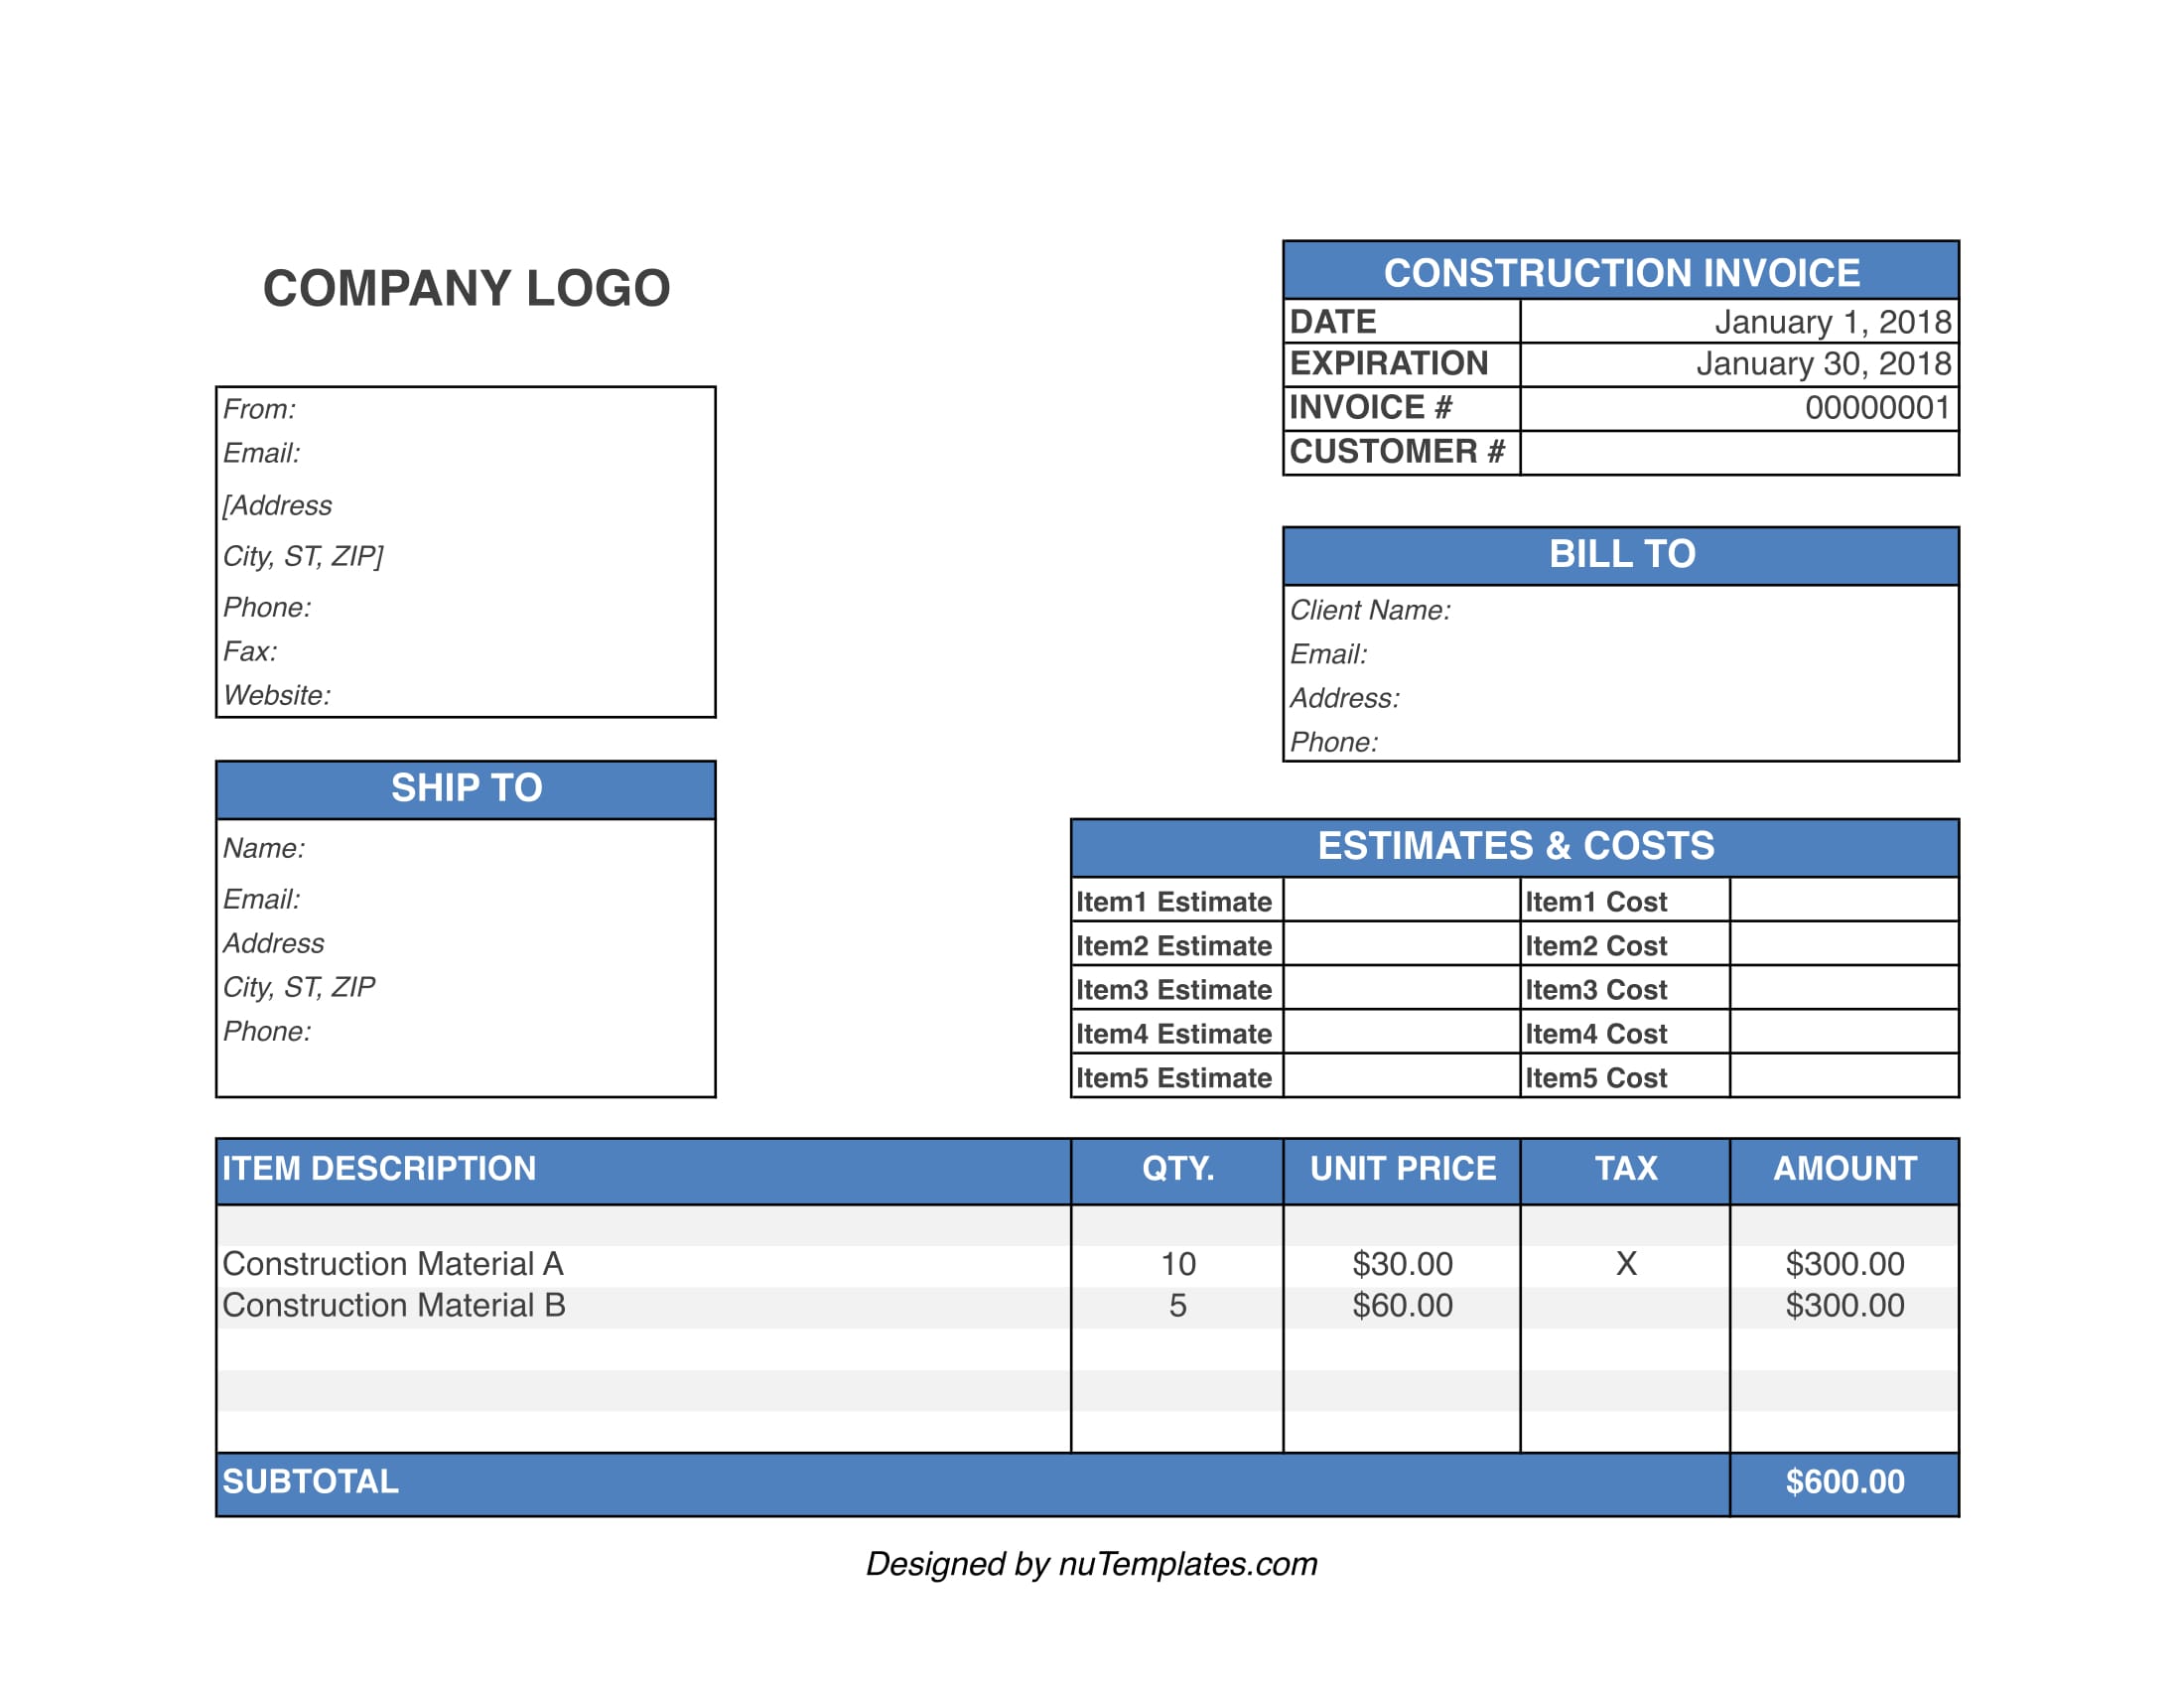 construction-invoice-template-construction-invoices-nutemplates